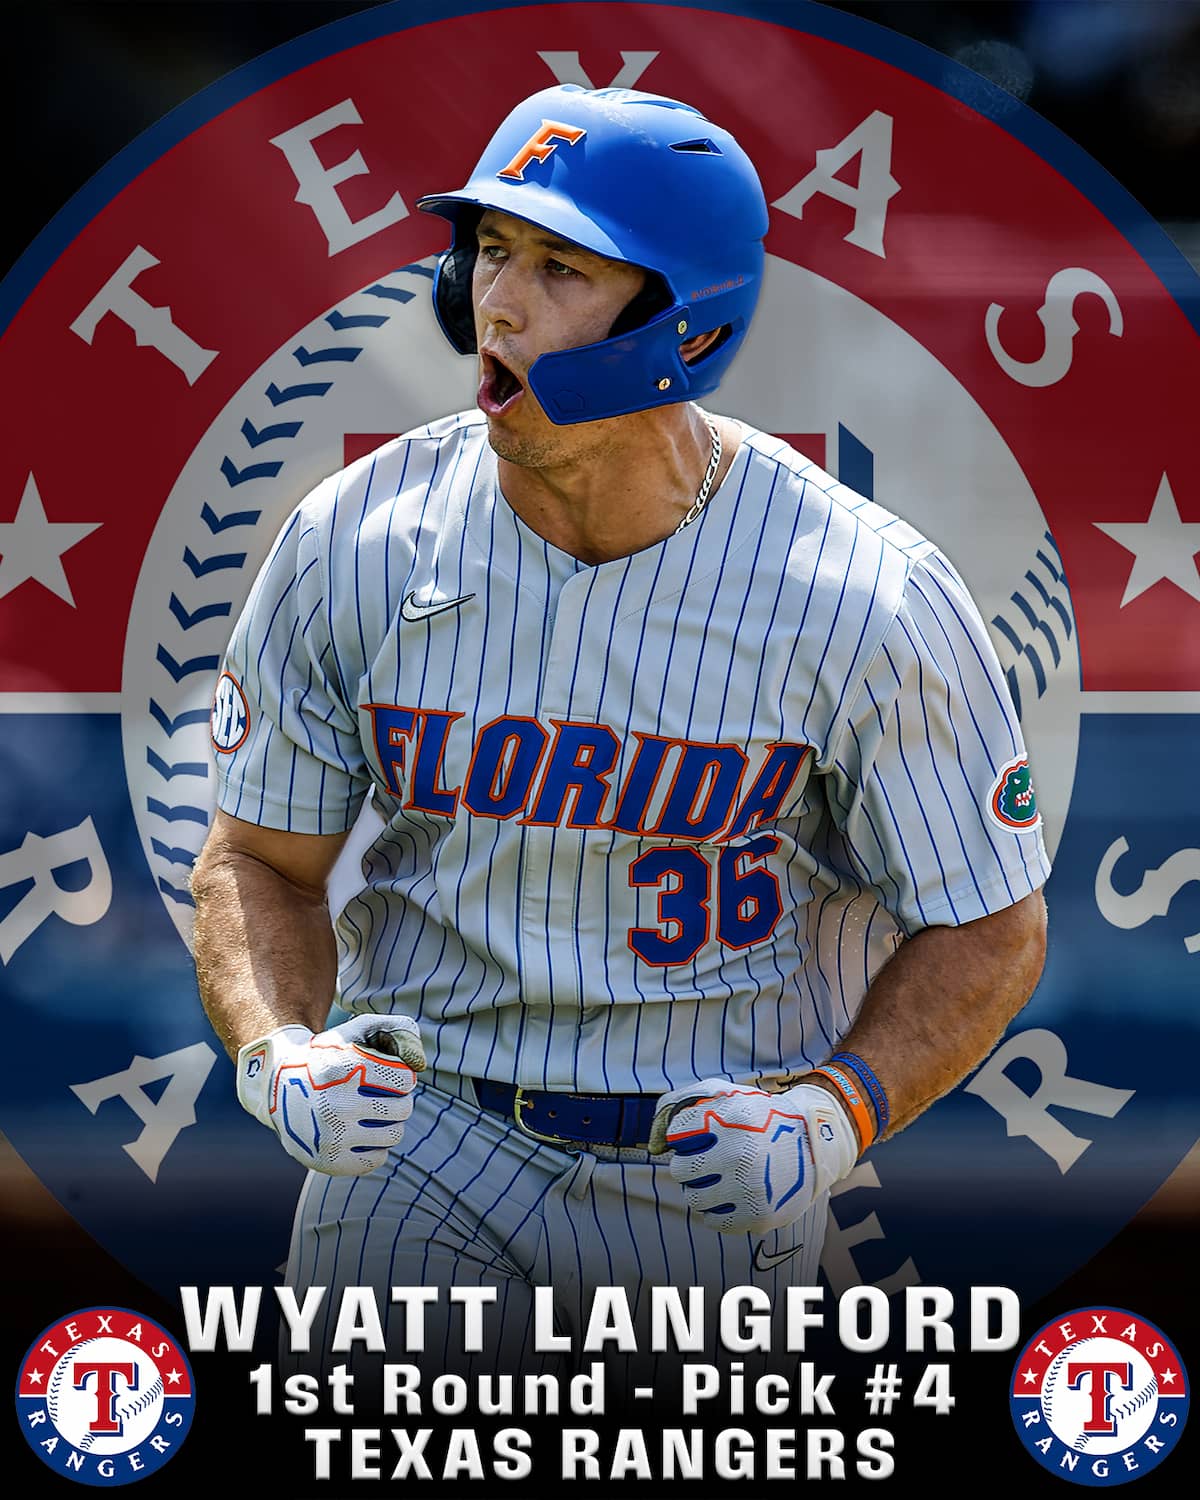 Wyatt Langford: High-A to Double-A Frisco